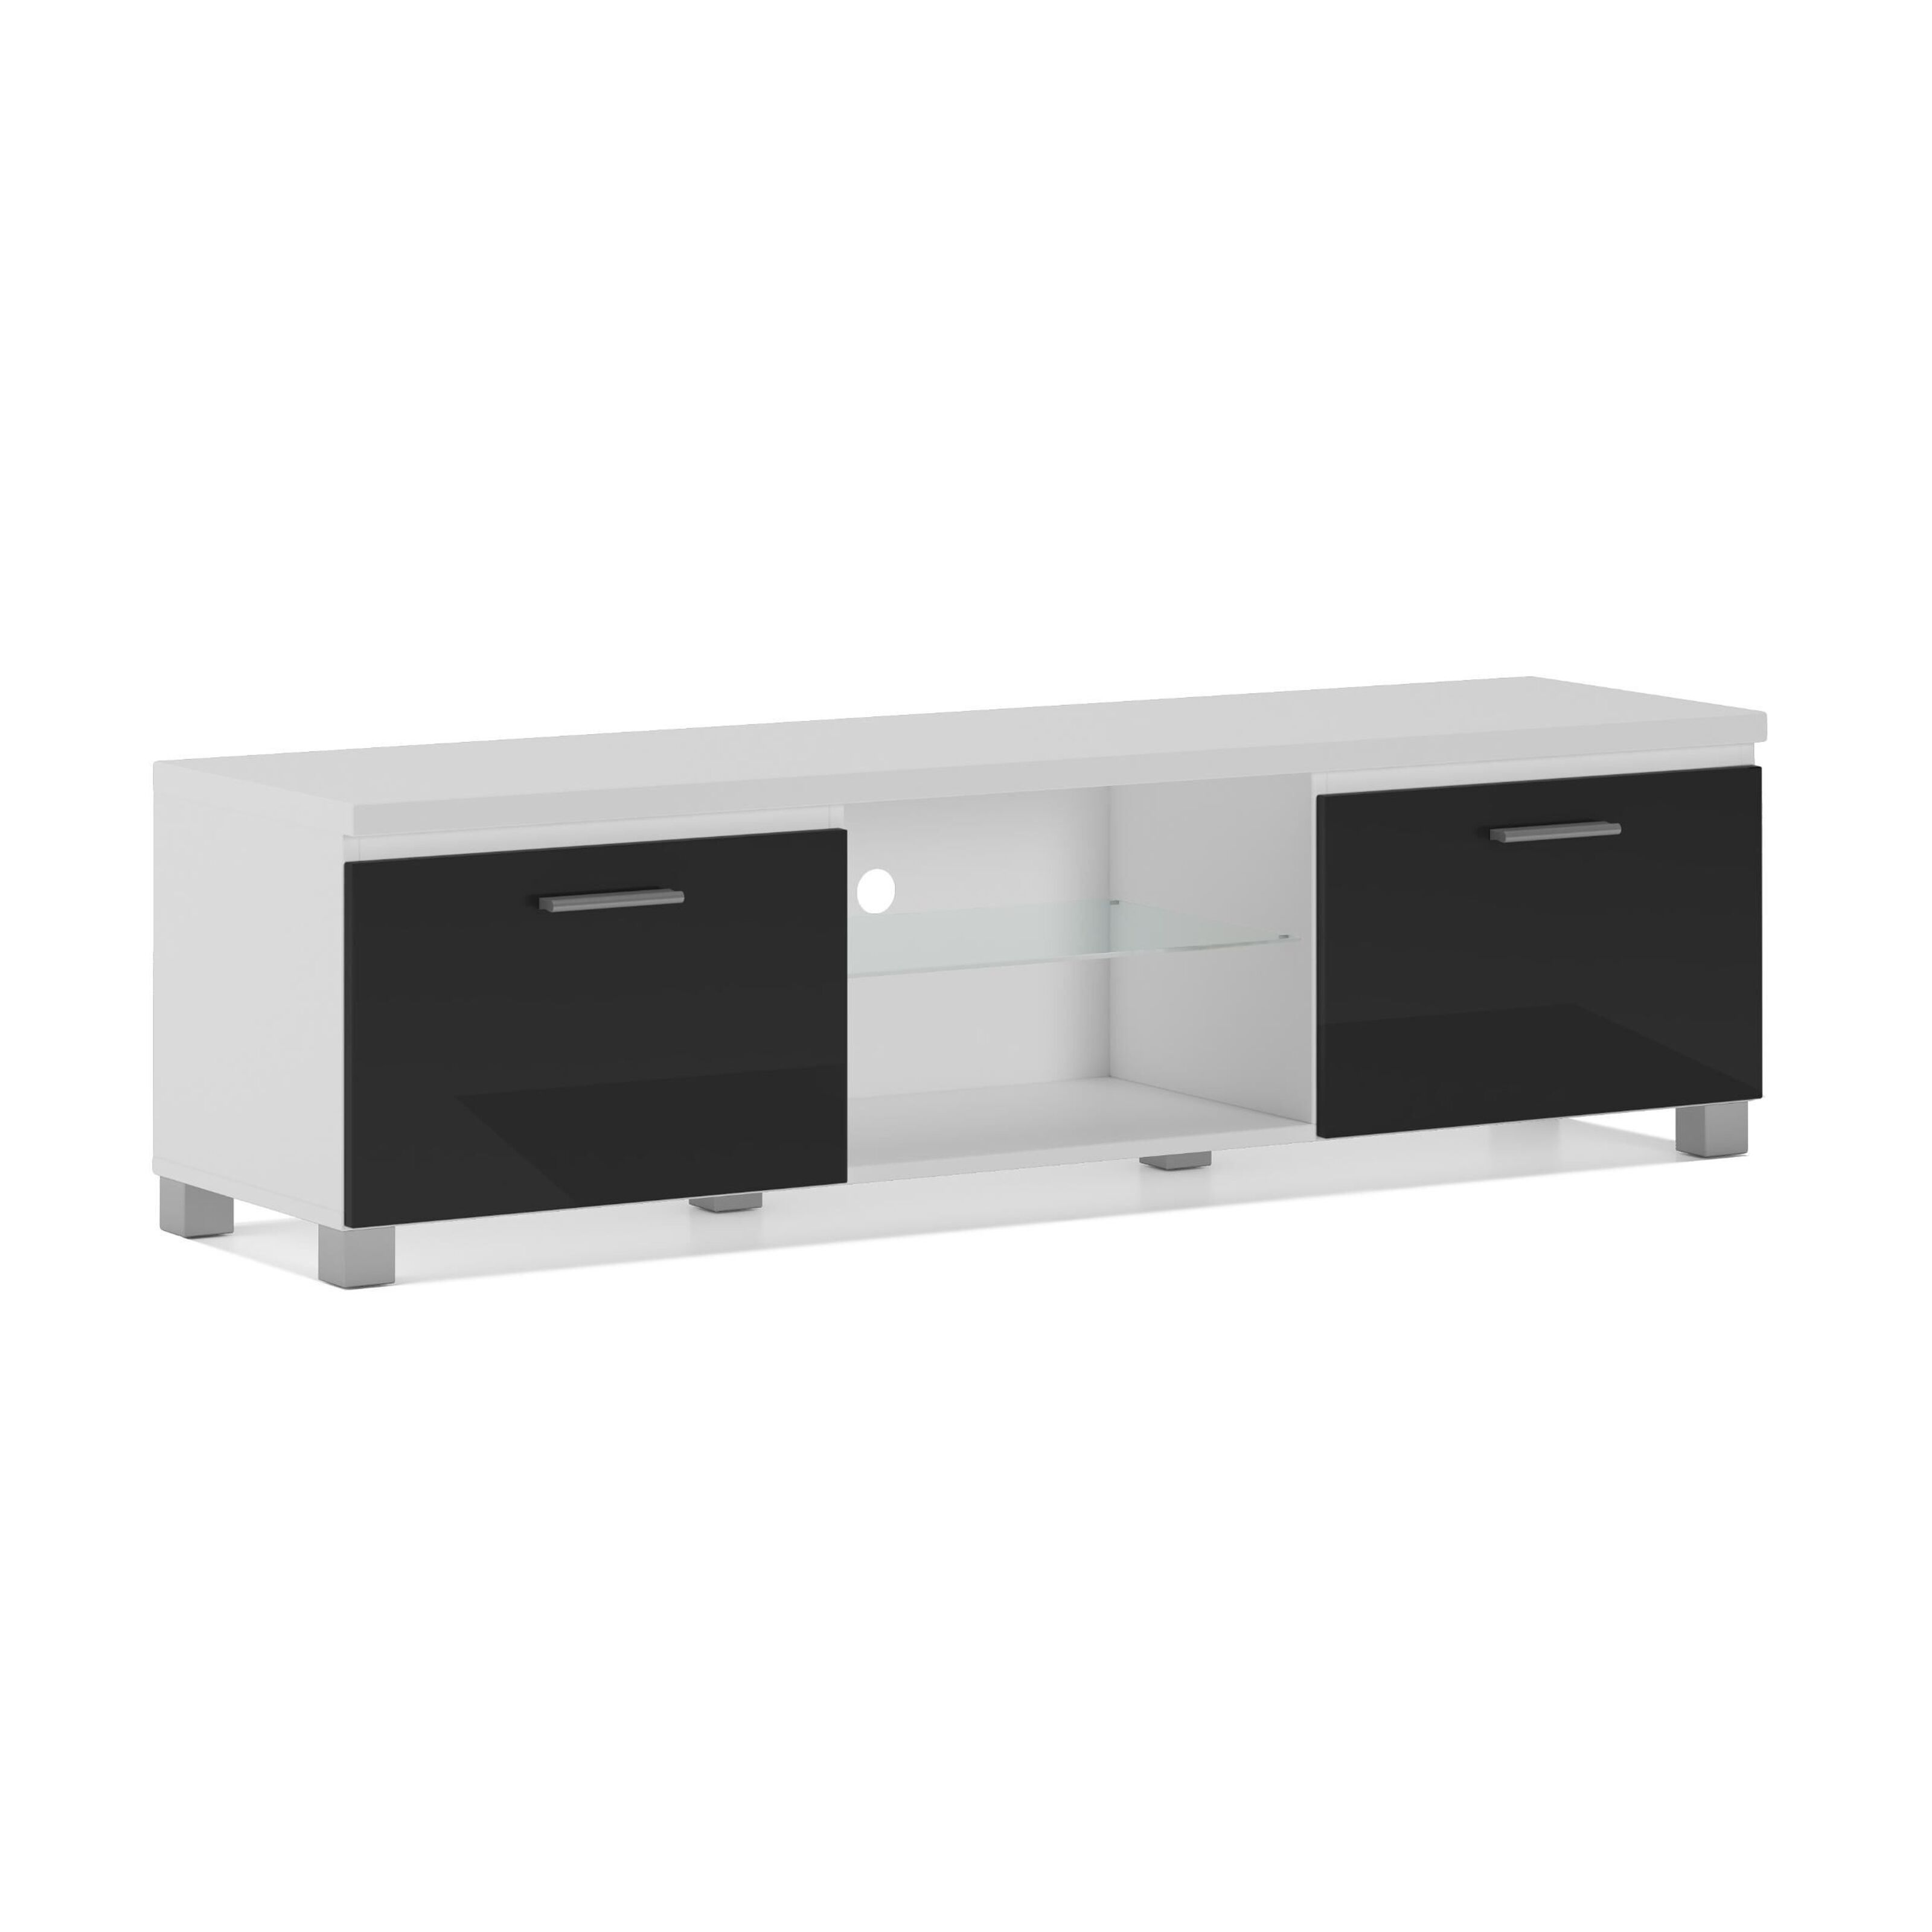 Buy wholesale Skraut Home - Living room and dining room TV module, color  White and Black Glossy Lacquer, measurements: 100 x 40 x 42 cm deep